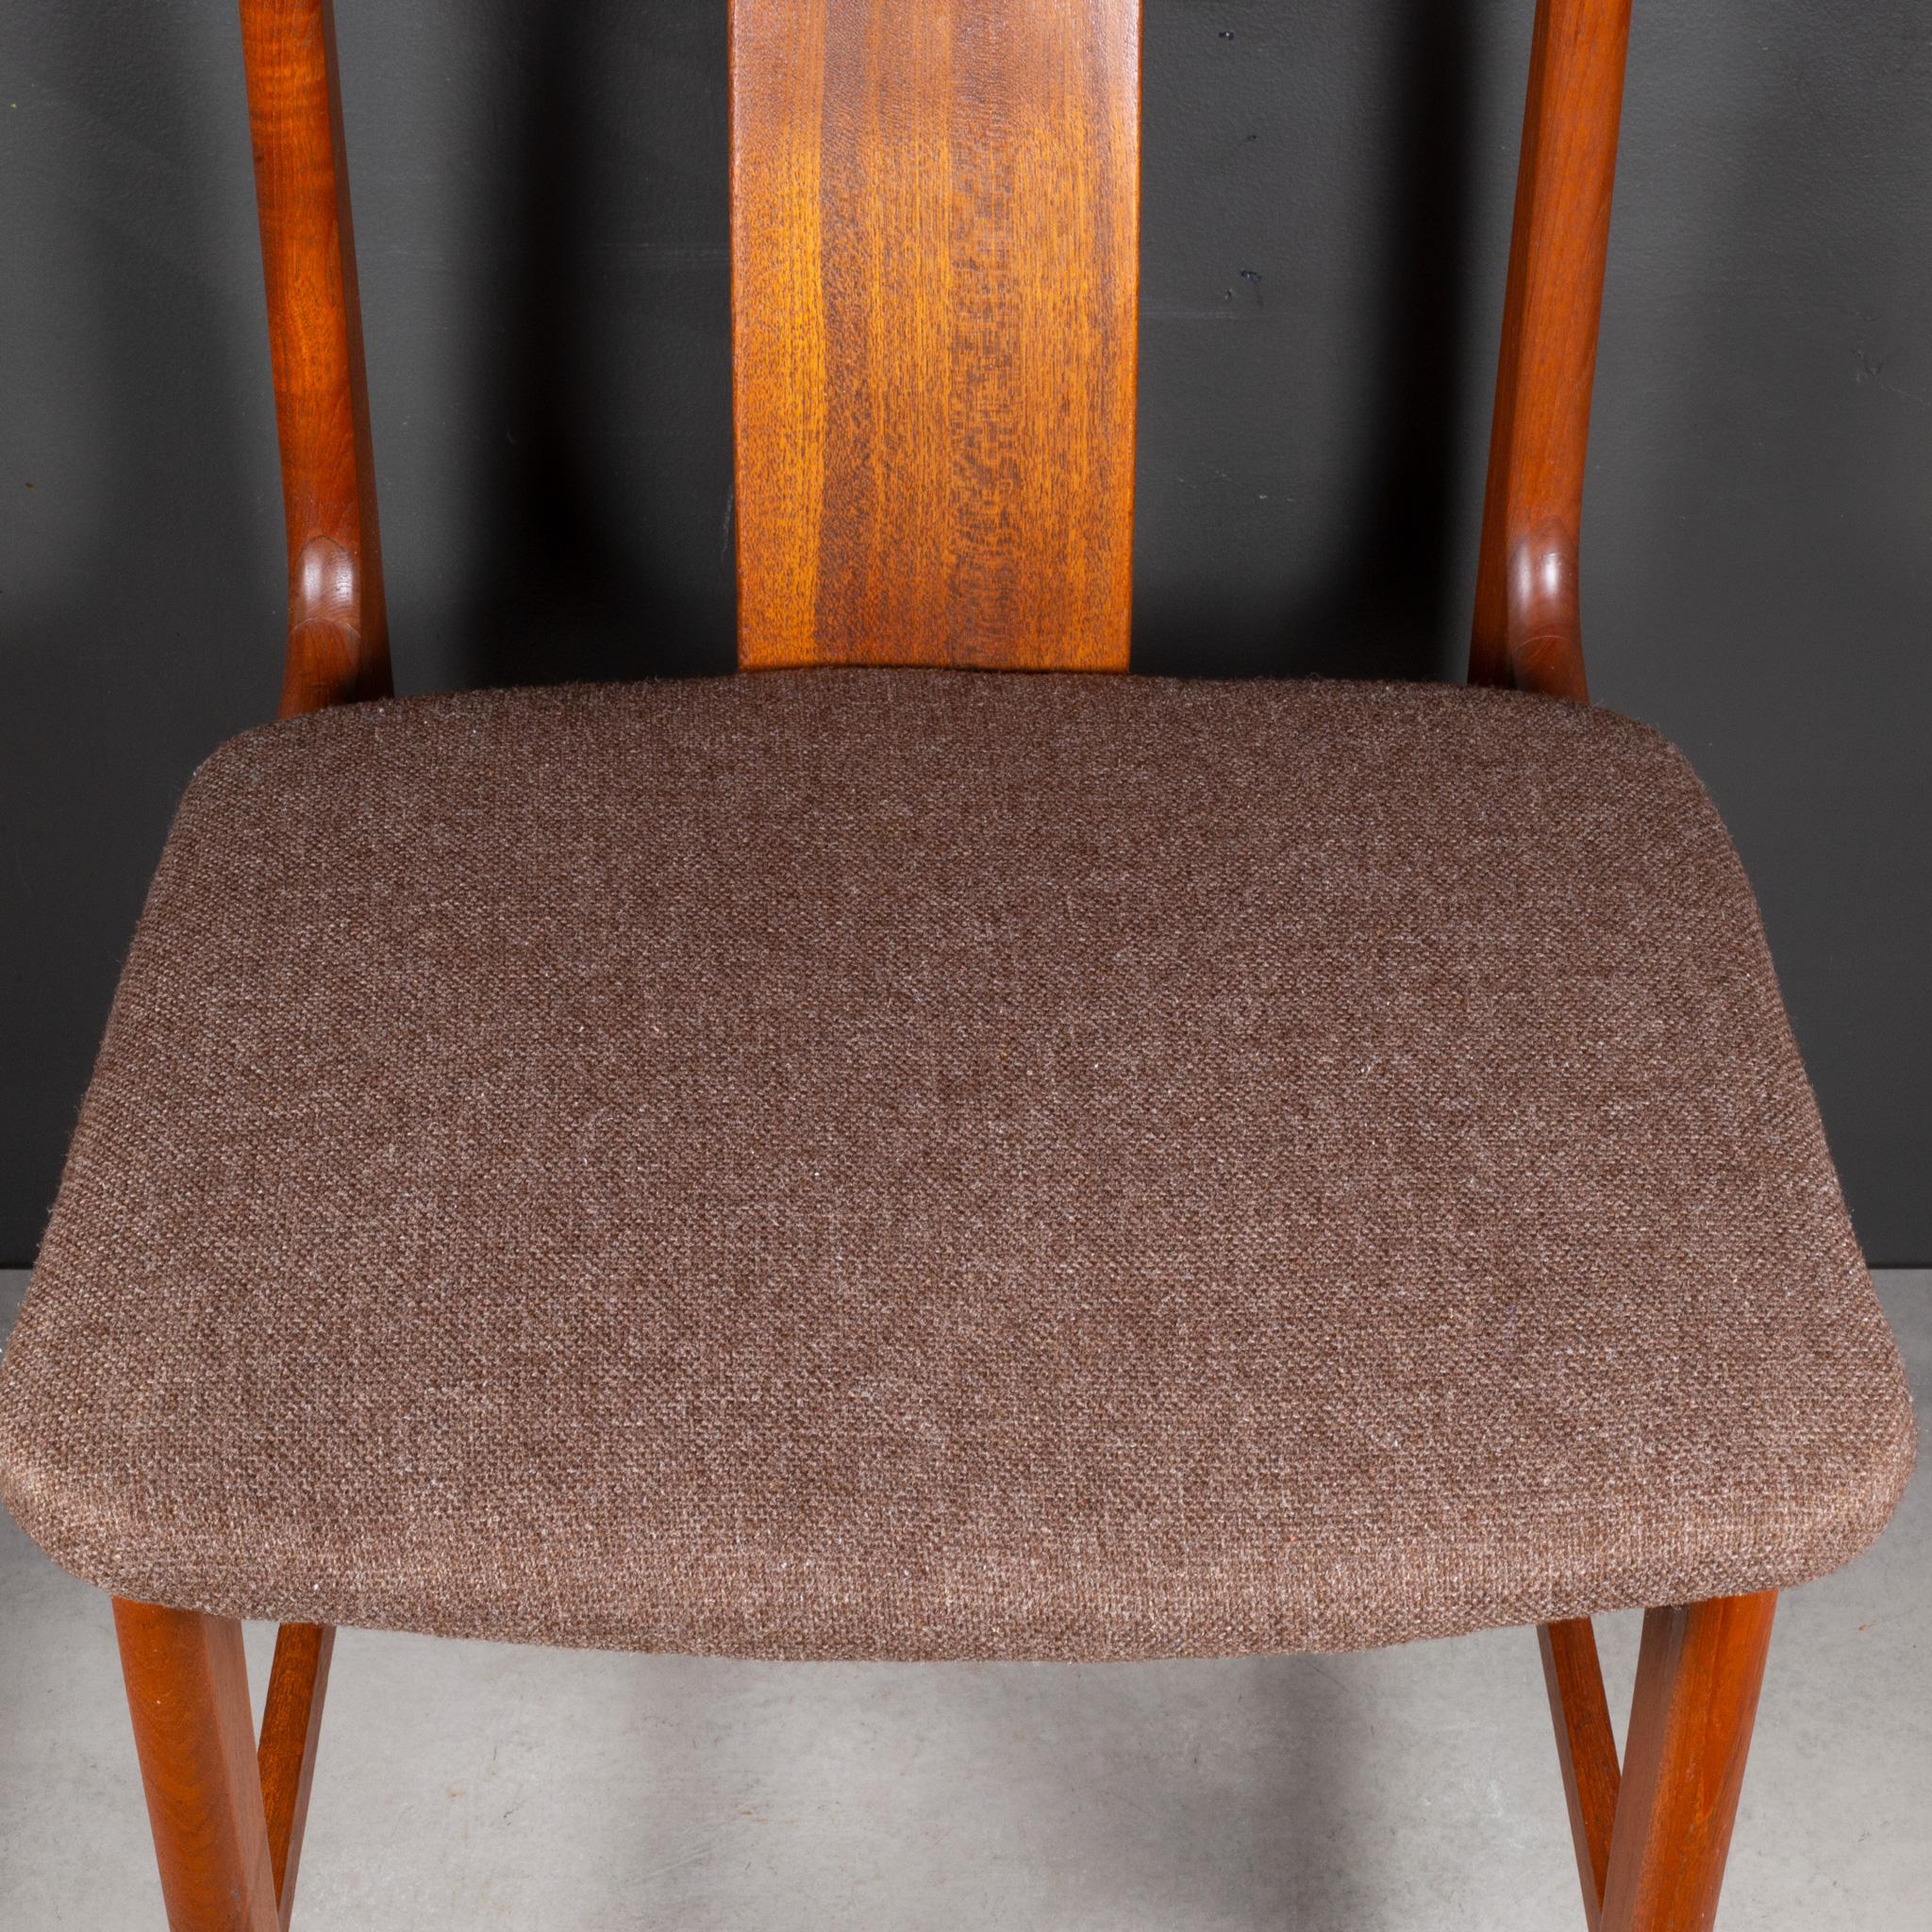 Midcentury Japanese Sculpted Teak Dining Chairs C.1960 For Sale 6